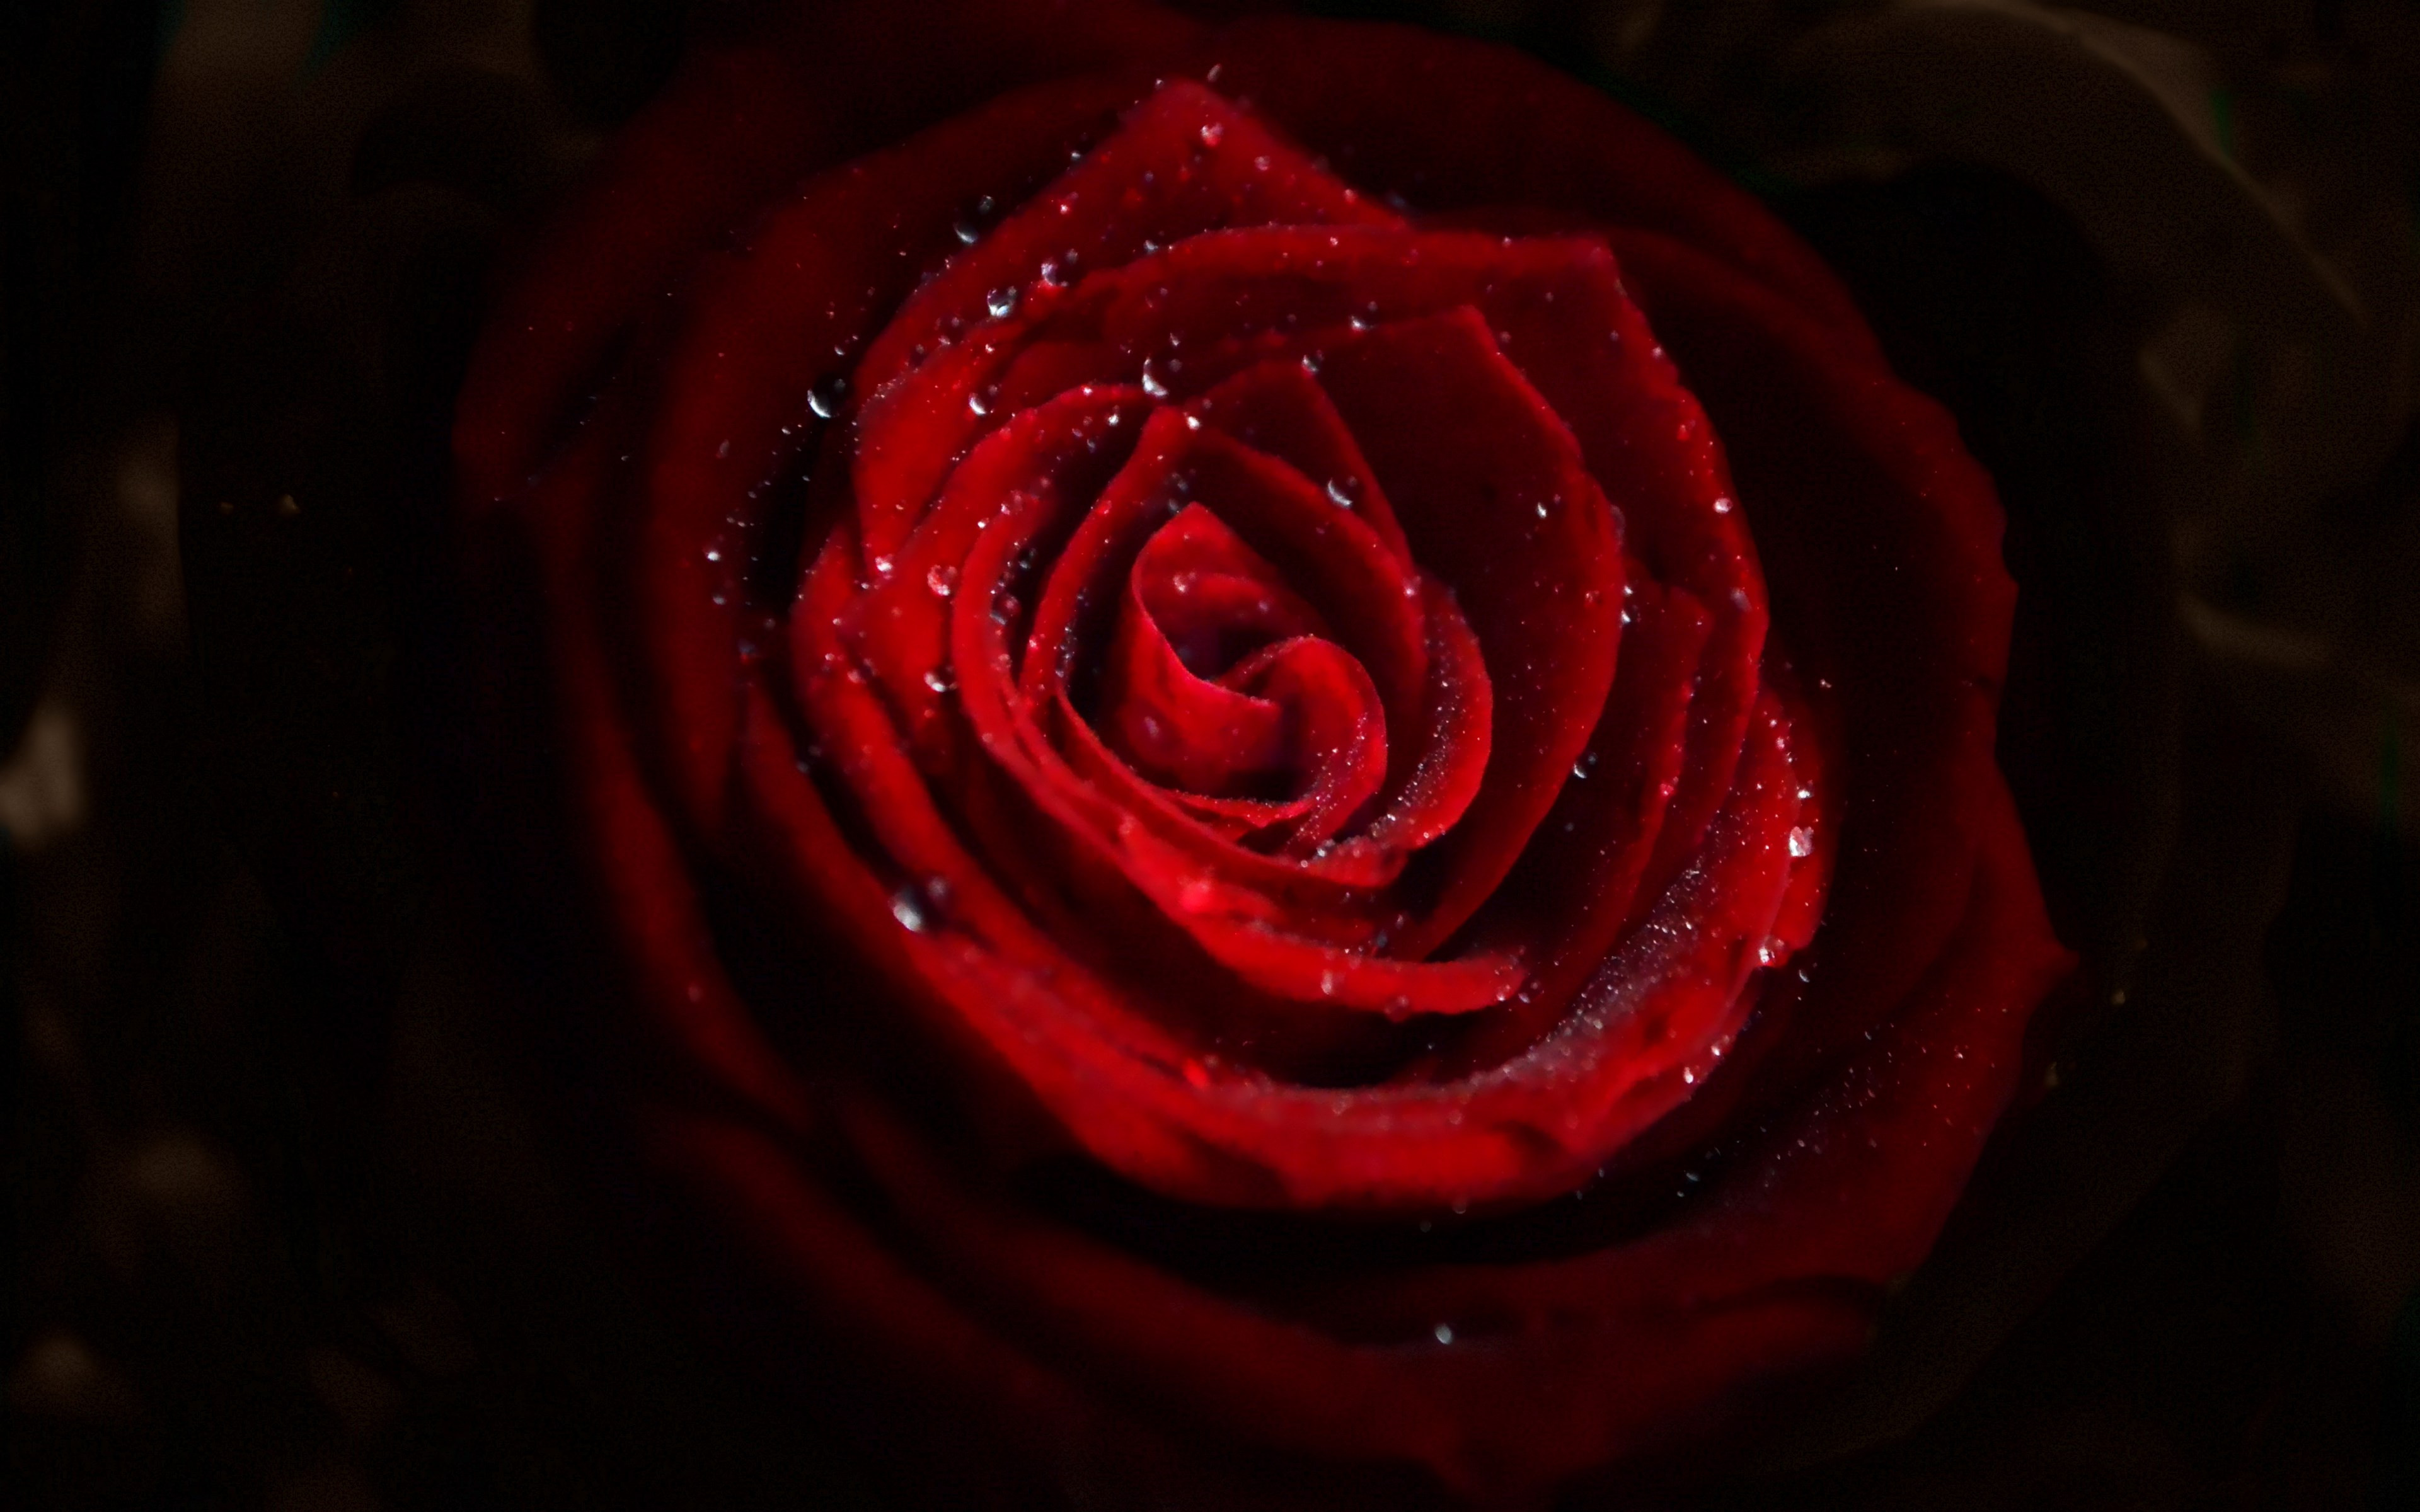 Water drops on red rose wallpaper 3840x2400